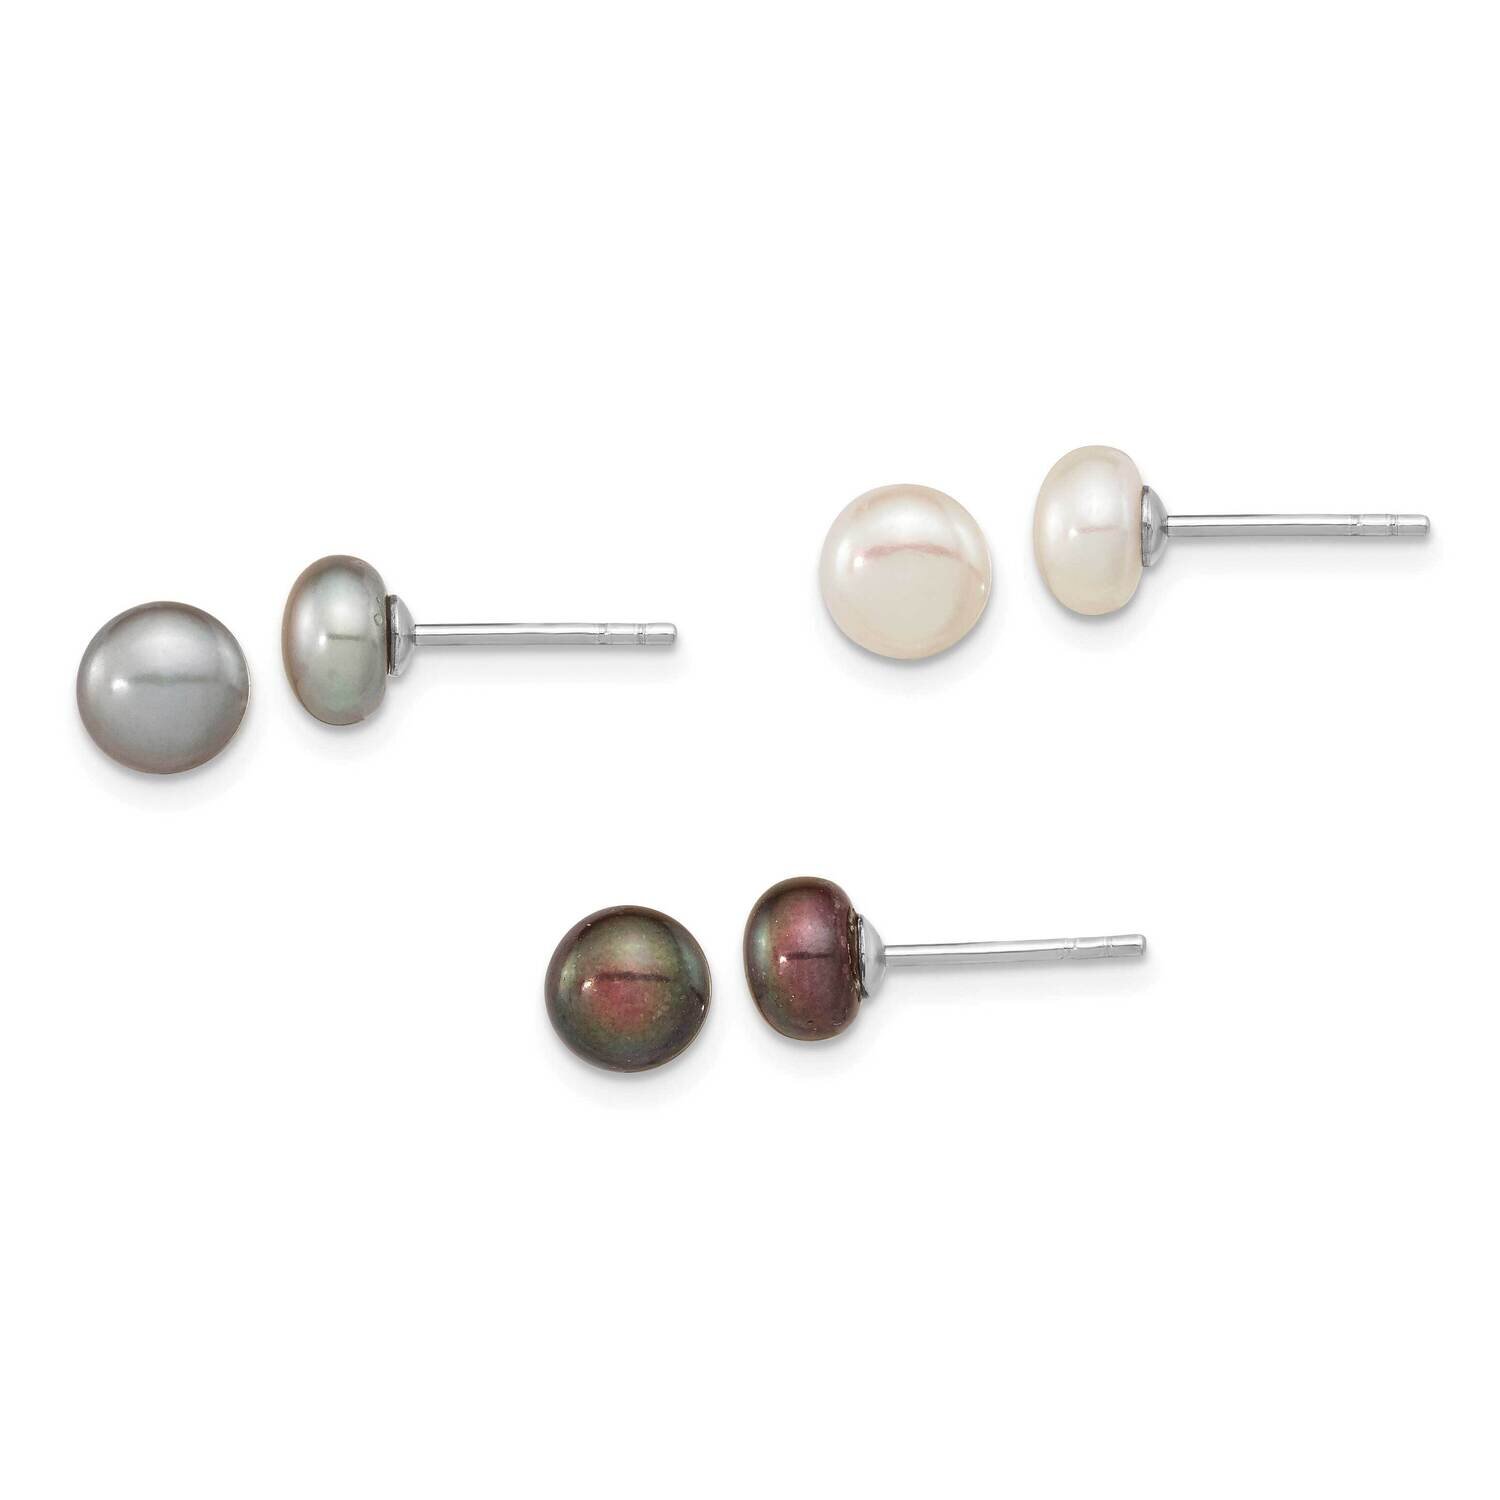 6-7mm Set of 3 Wt Bk Grey Button Fwc Pearl Earrings Sterling Silver Rhodium-Plated QE16322